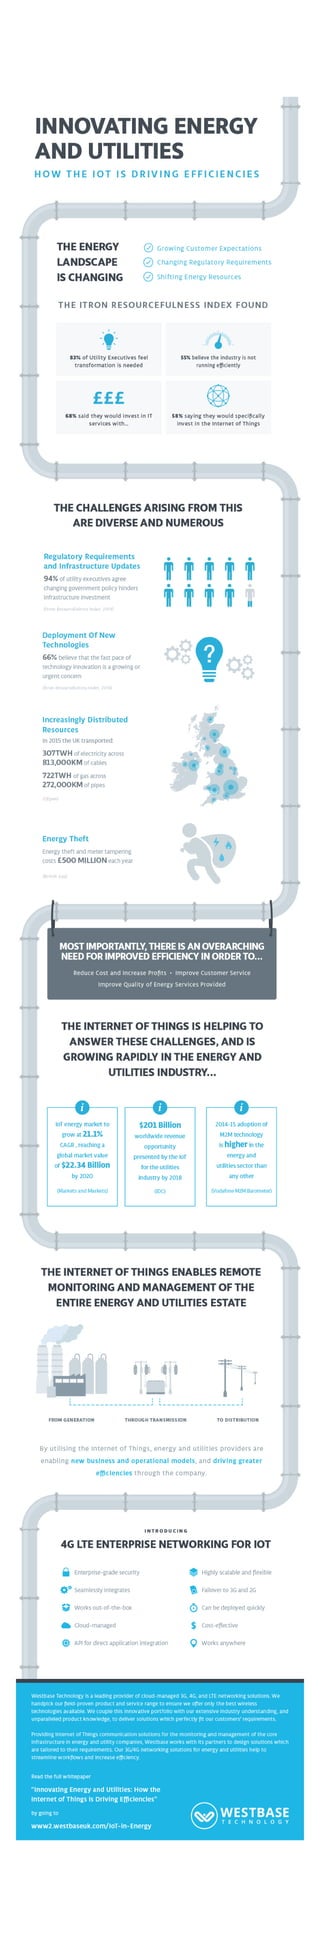 Infographic: Innovating Energy and Utilities